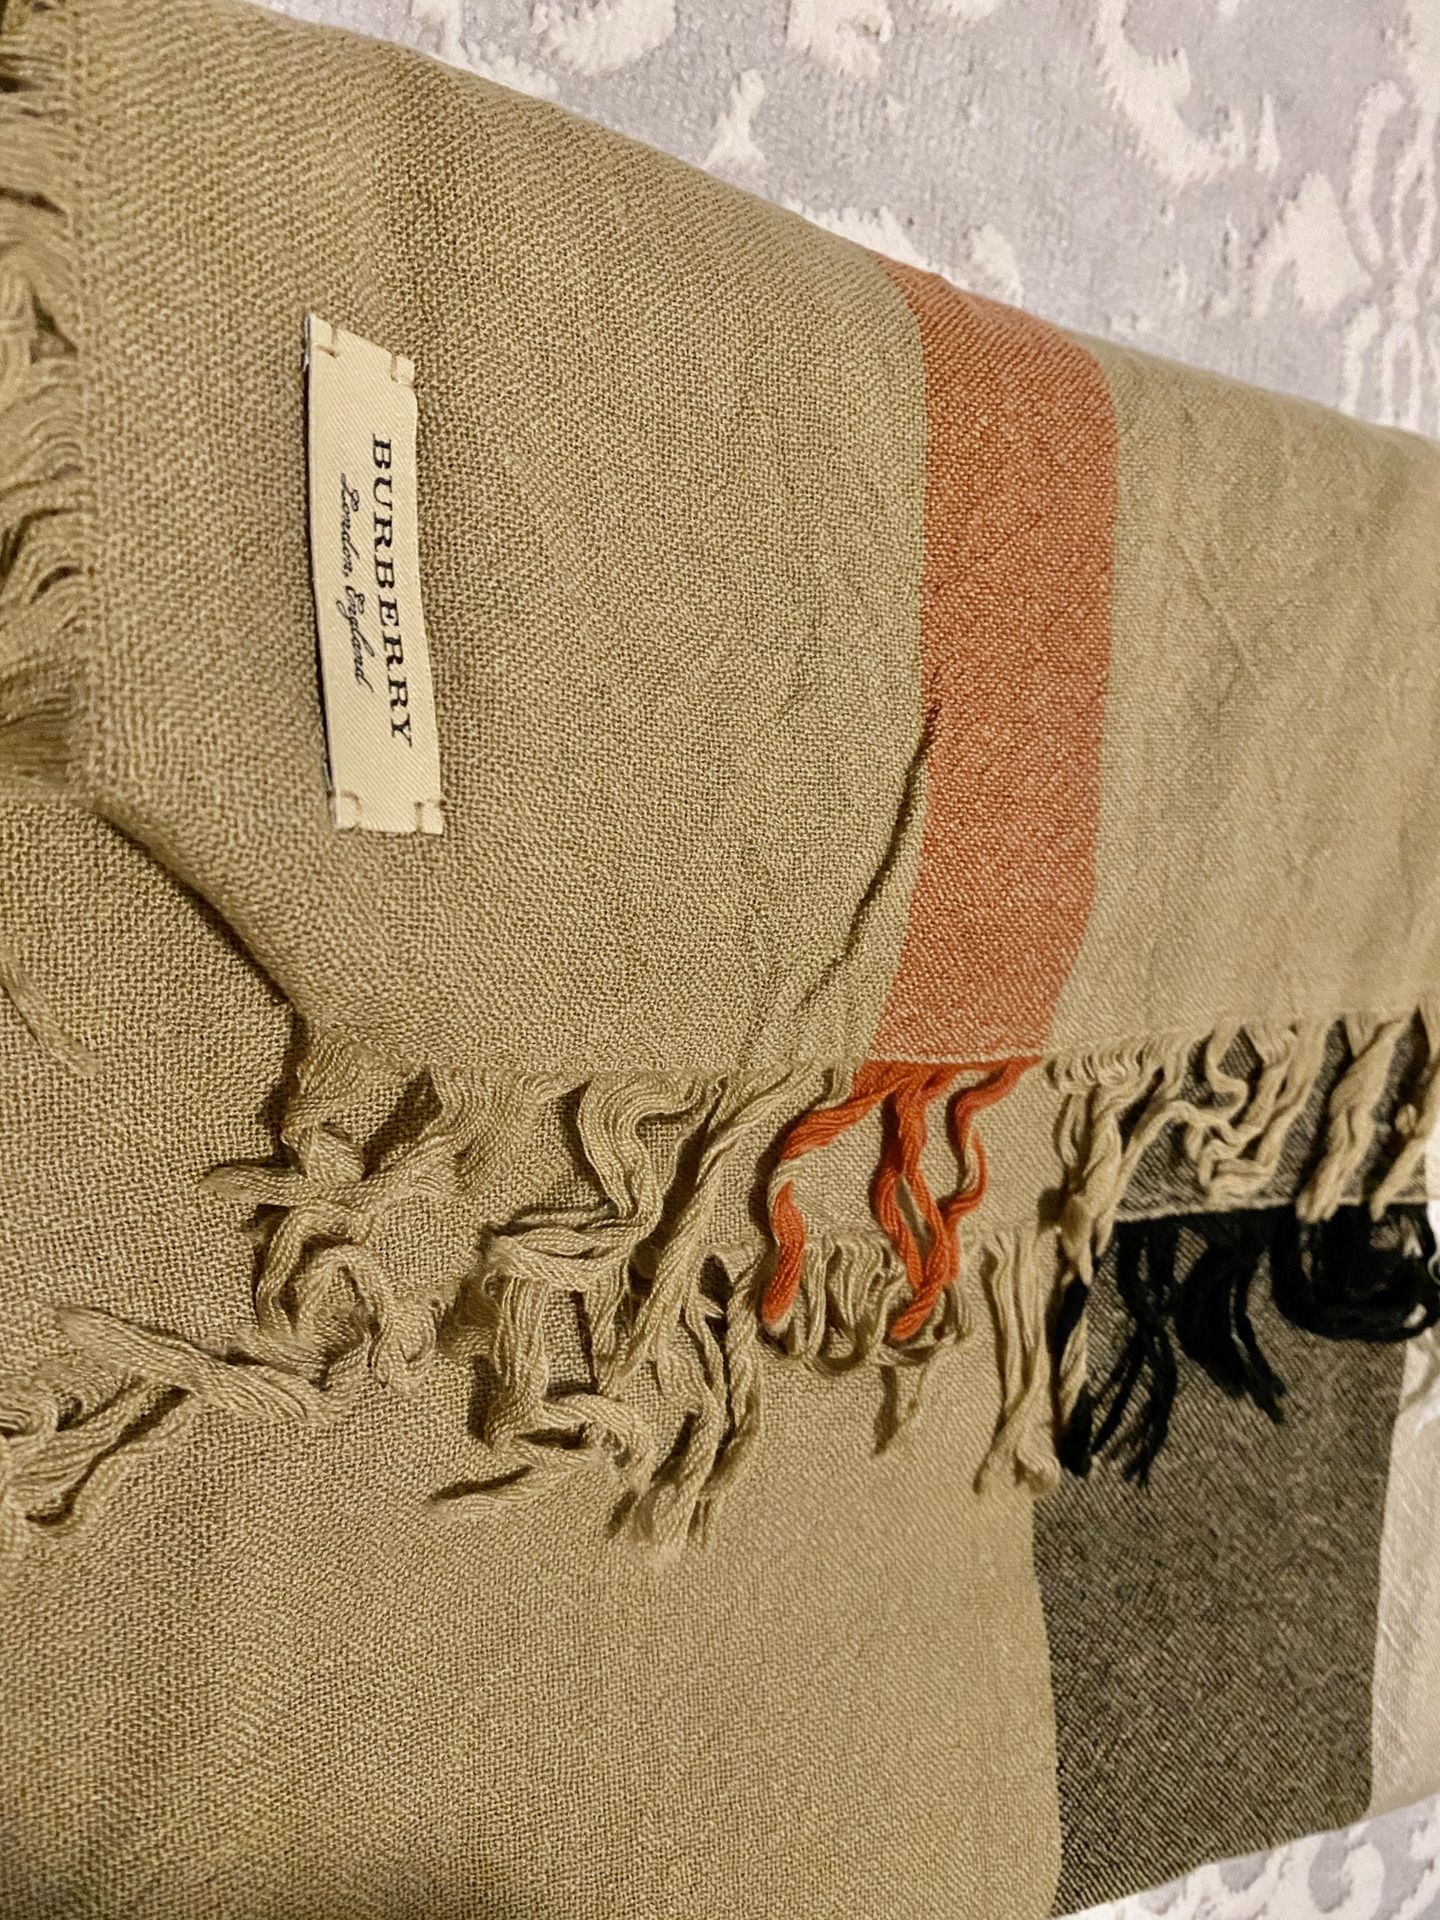 Burberry Scarf- Brand new never used